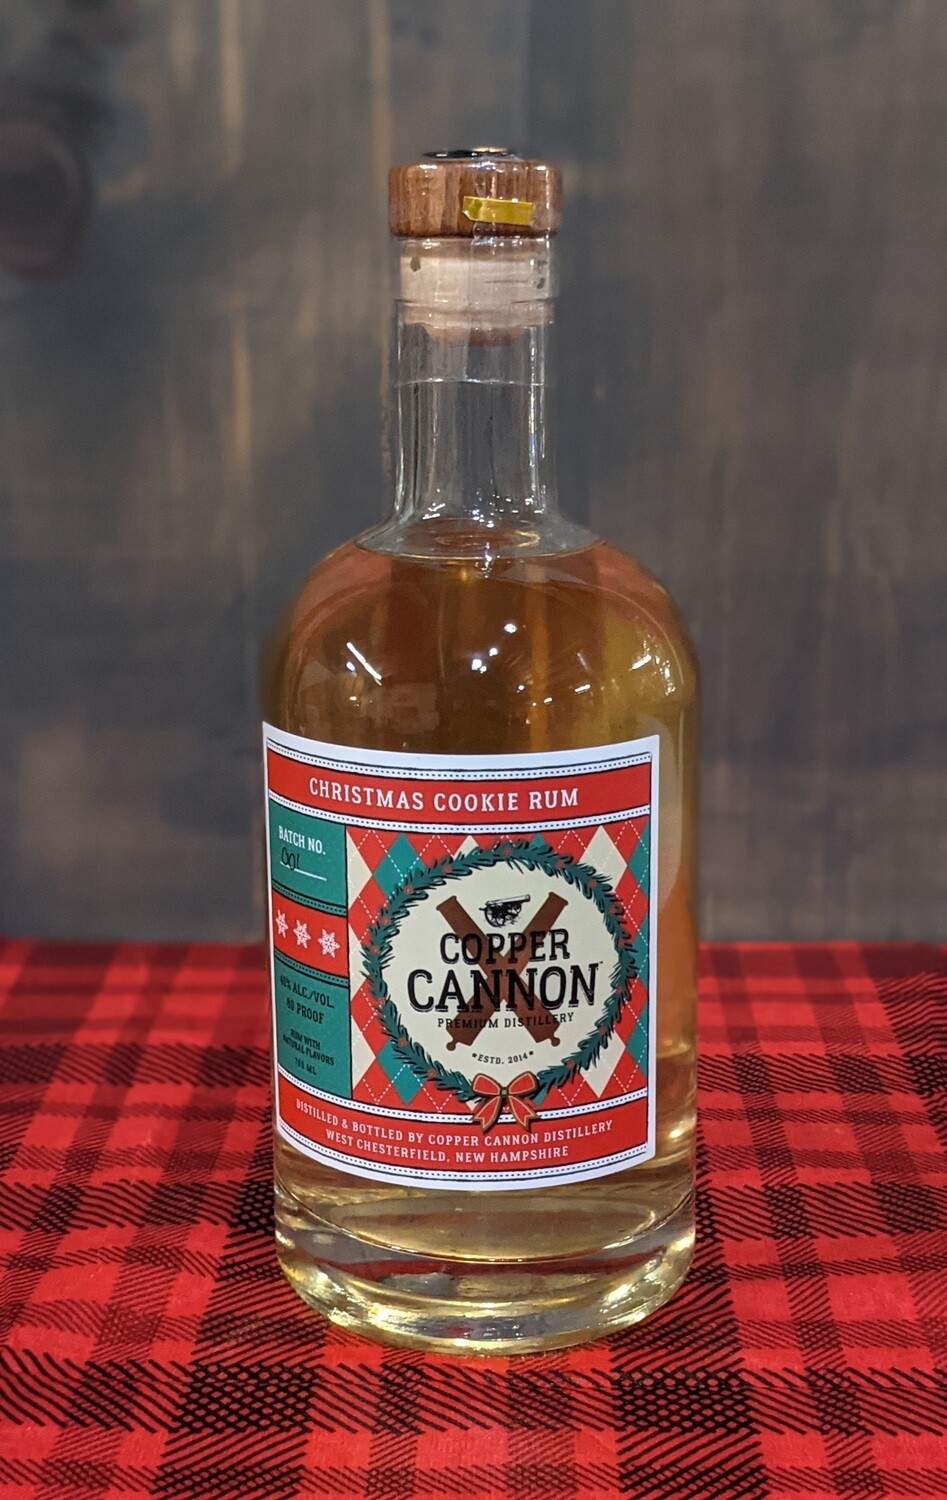 Copper Cannon Christmas Cookie Rum